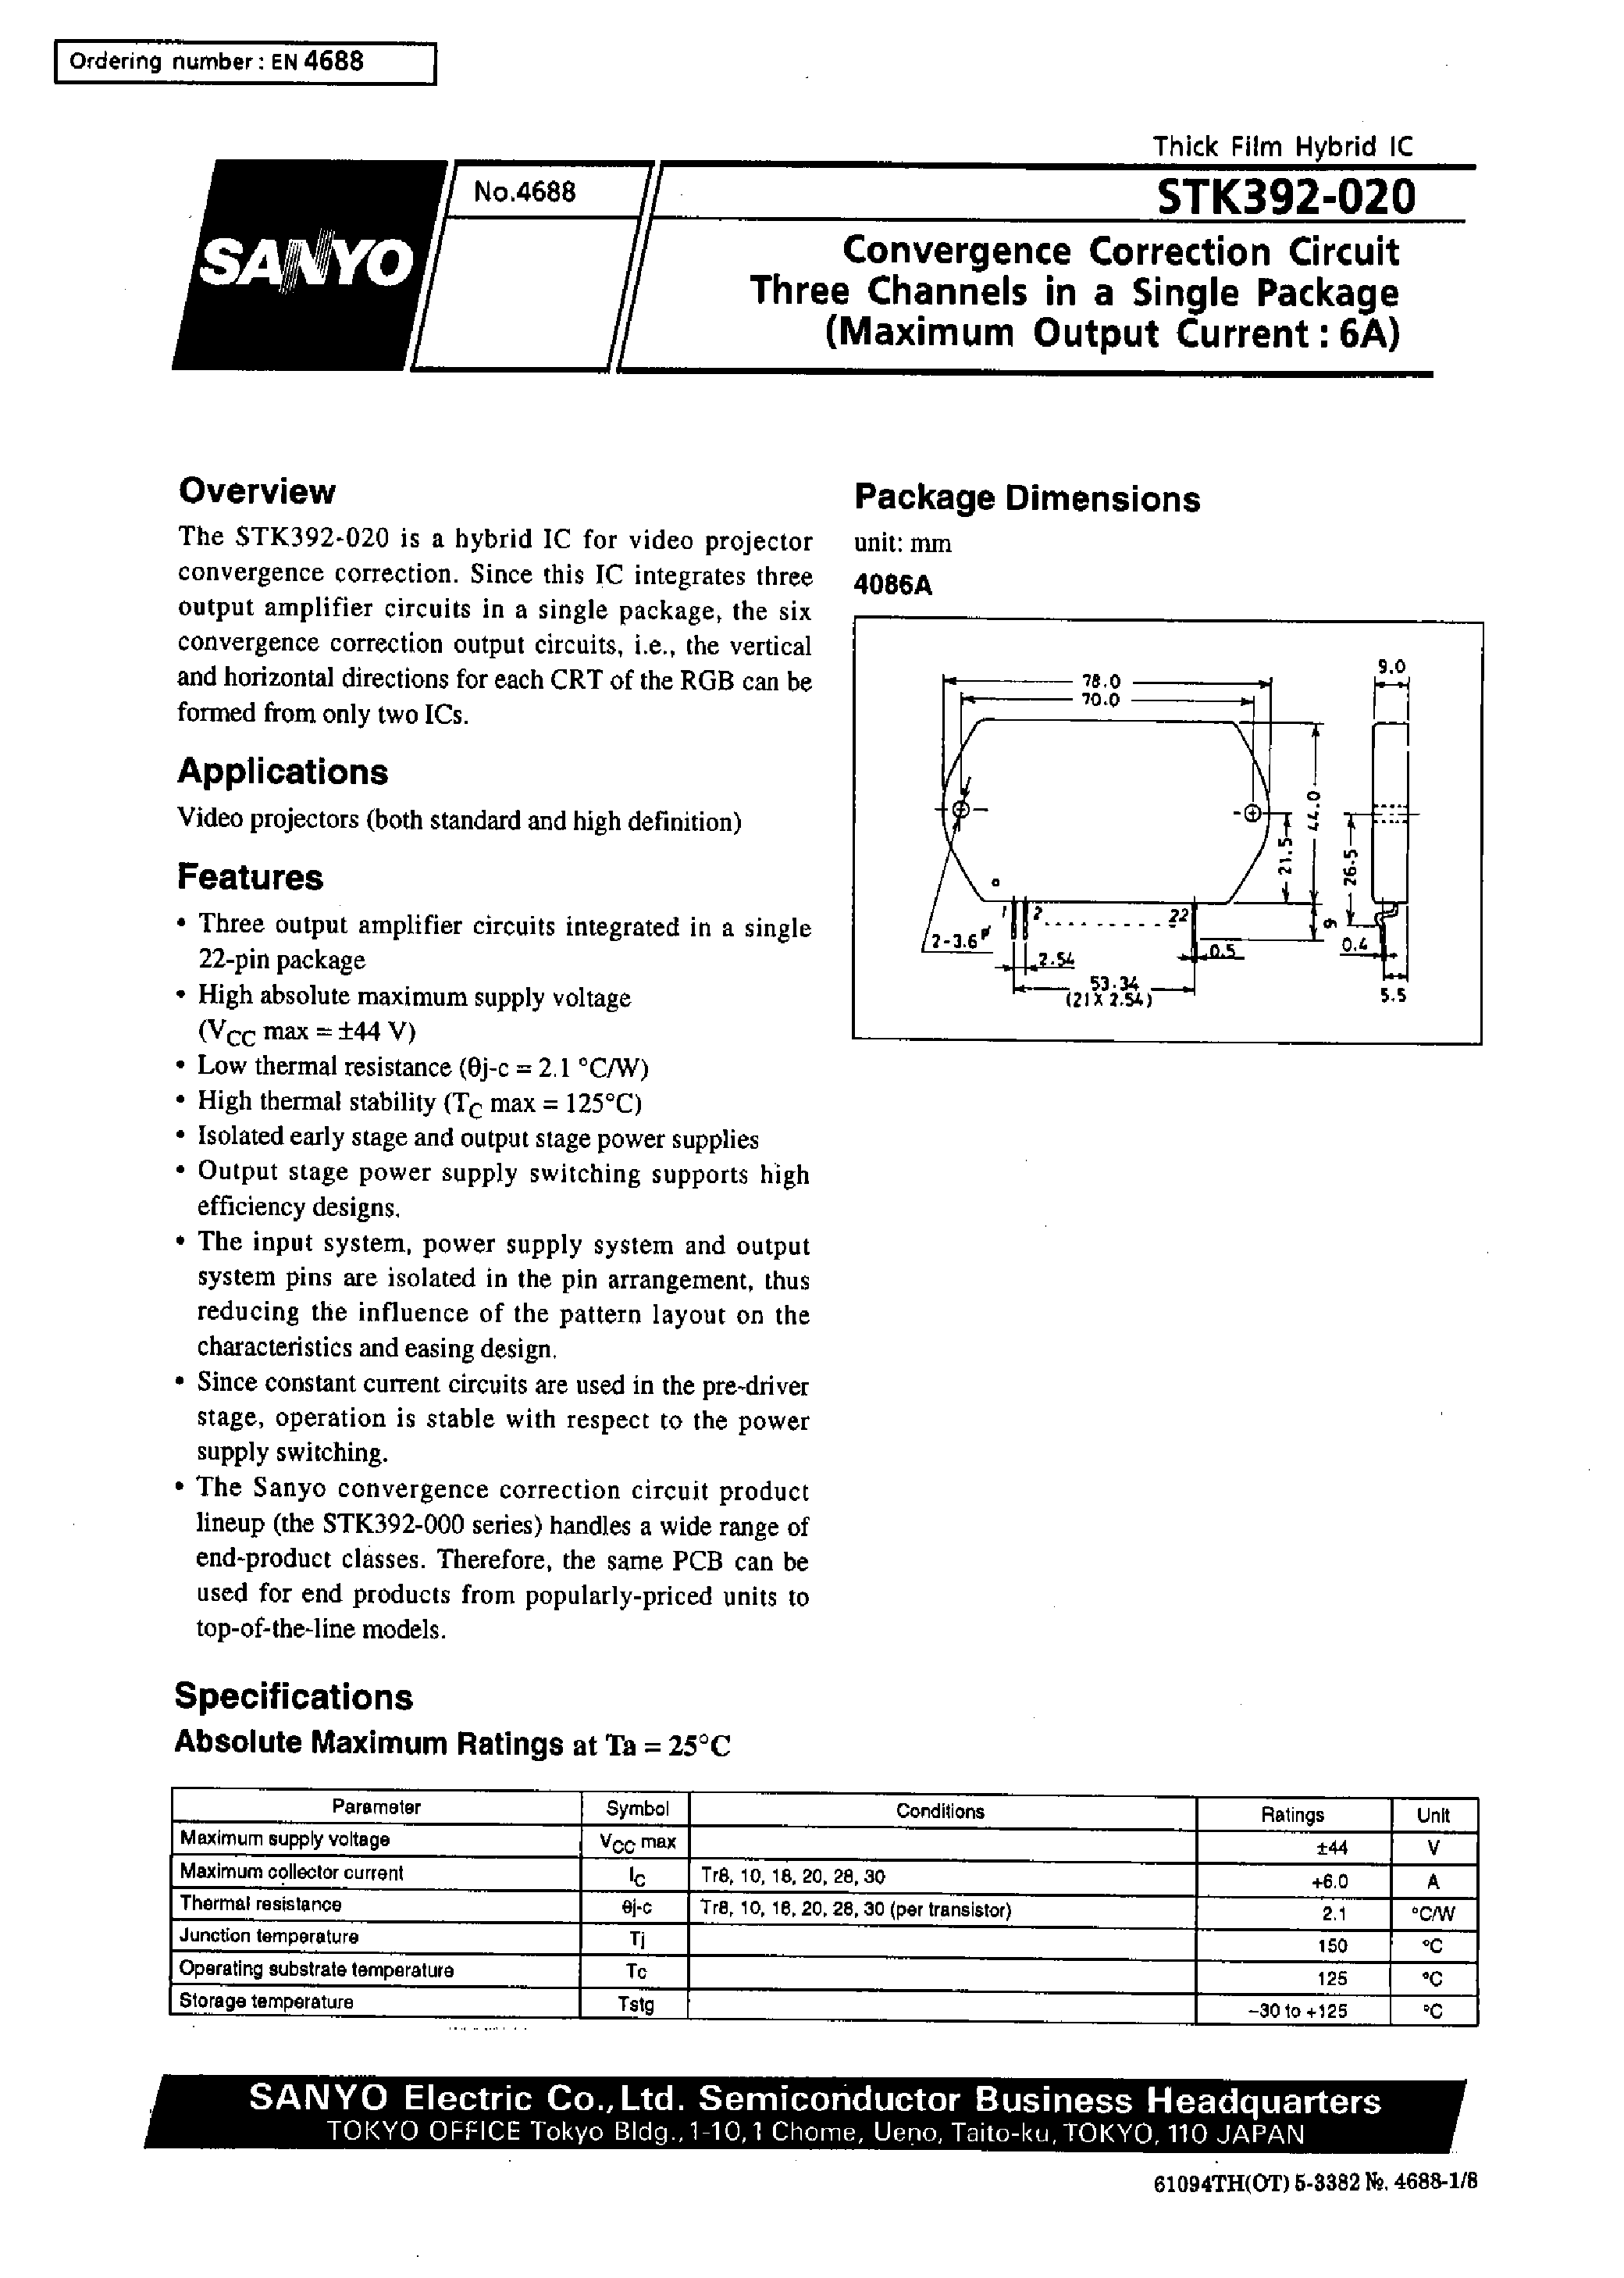 Datasheet STK392-020 - Convergence Correction Circuit Three Channel in a Single Package(Maximum Output Current:6A) page 1